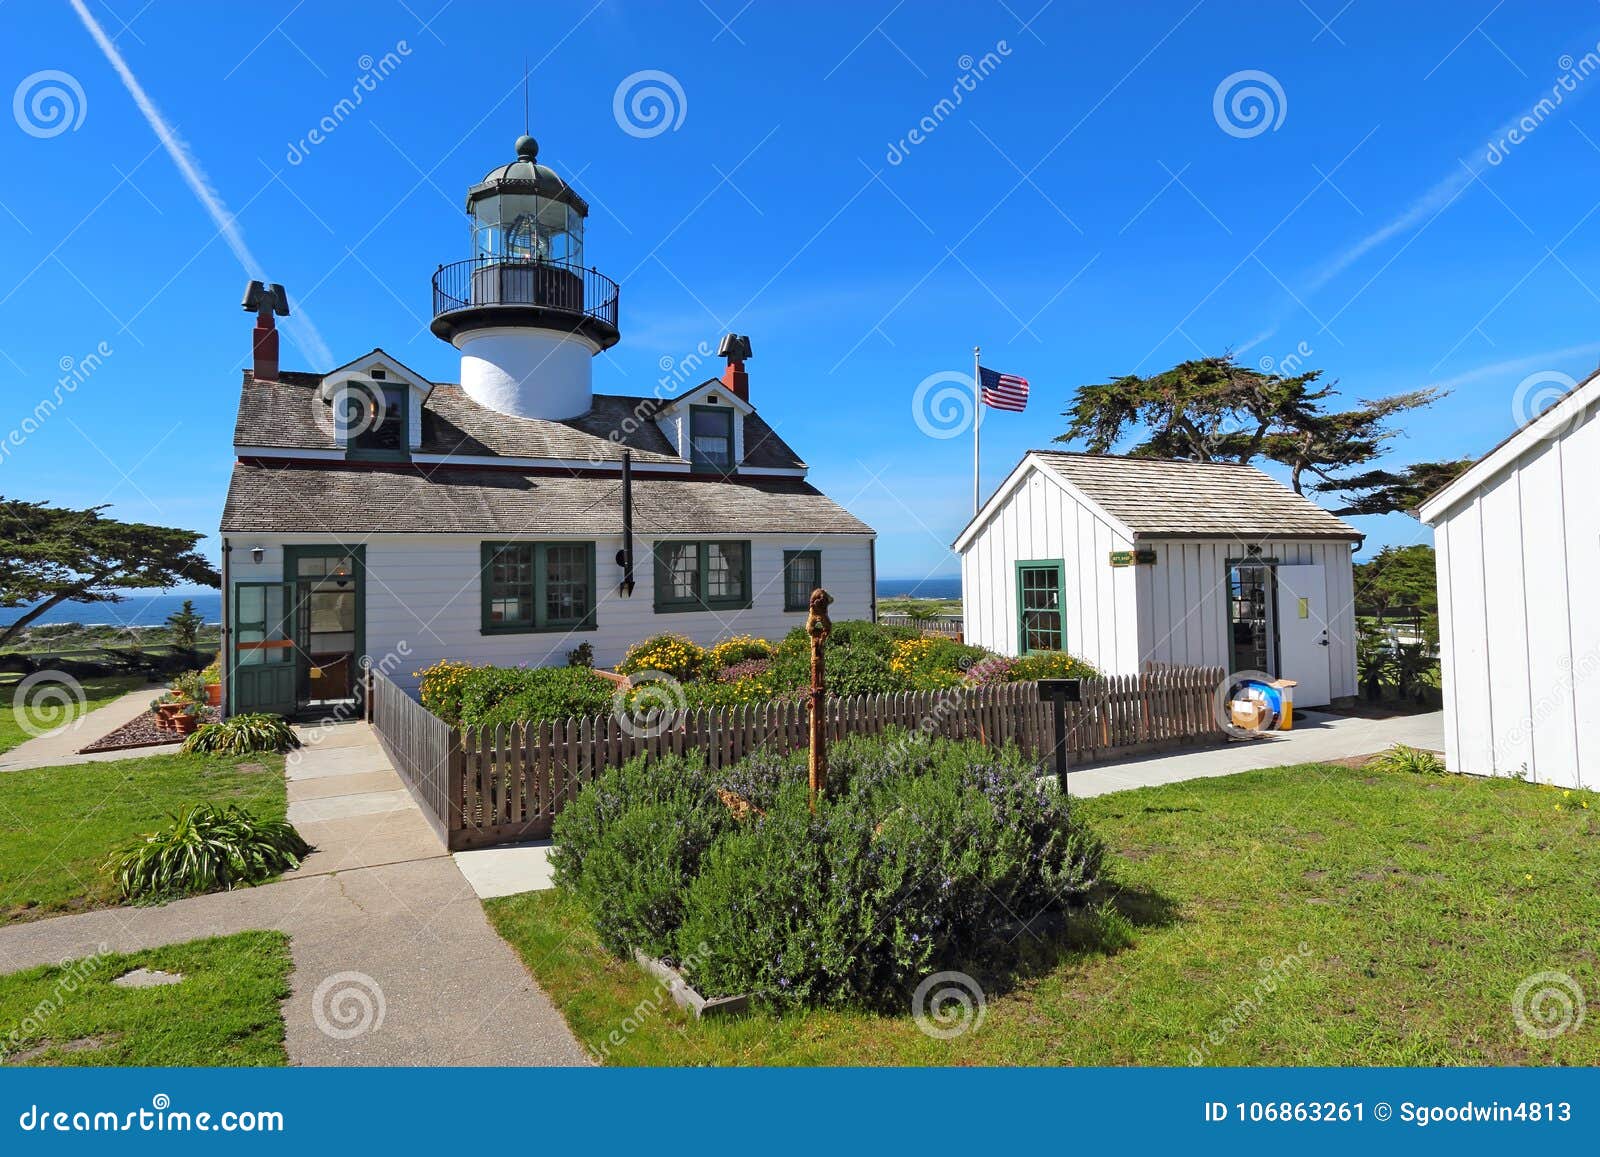 point pinos lighthouse in pacific grove, california